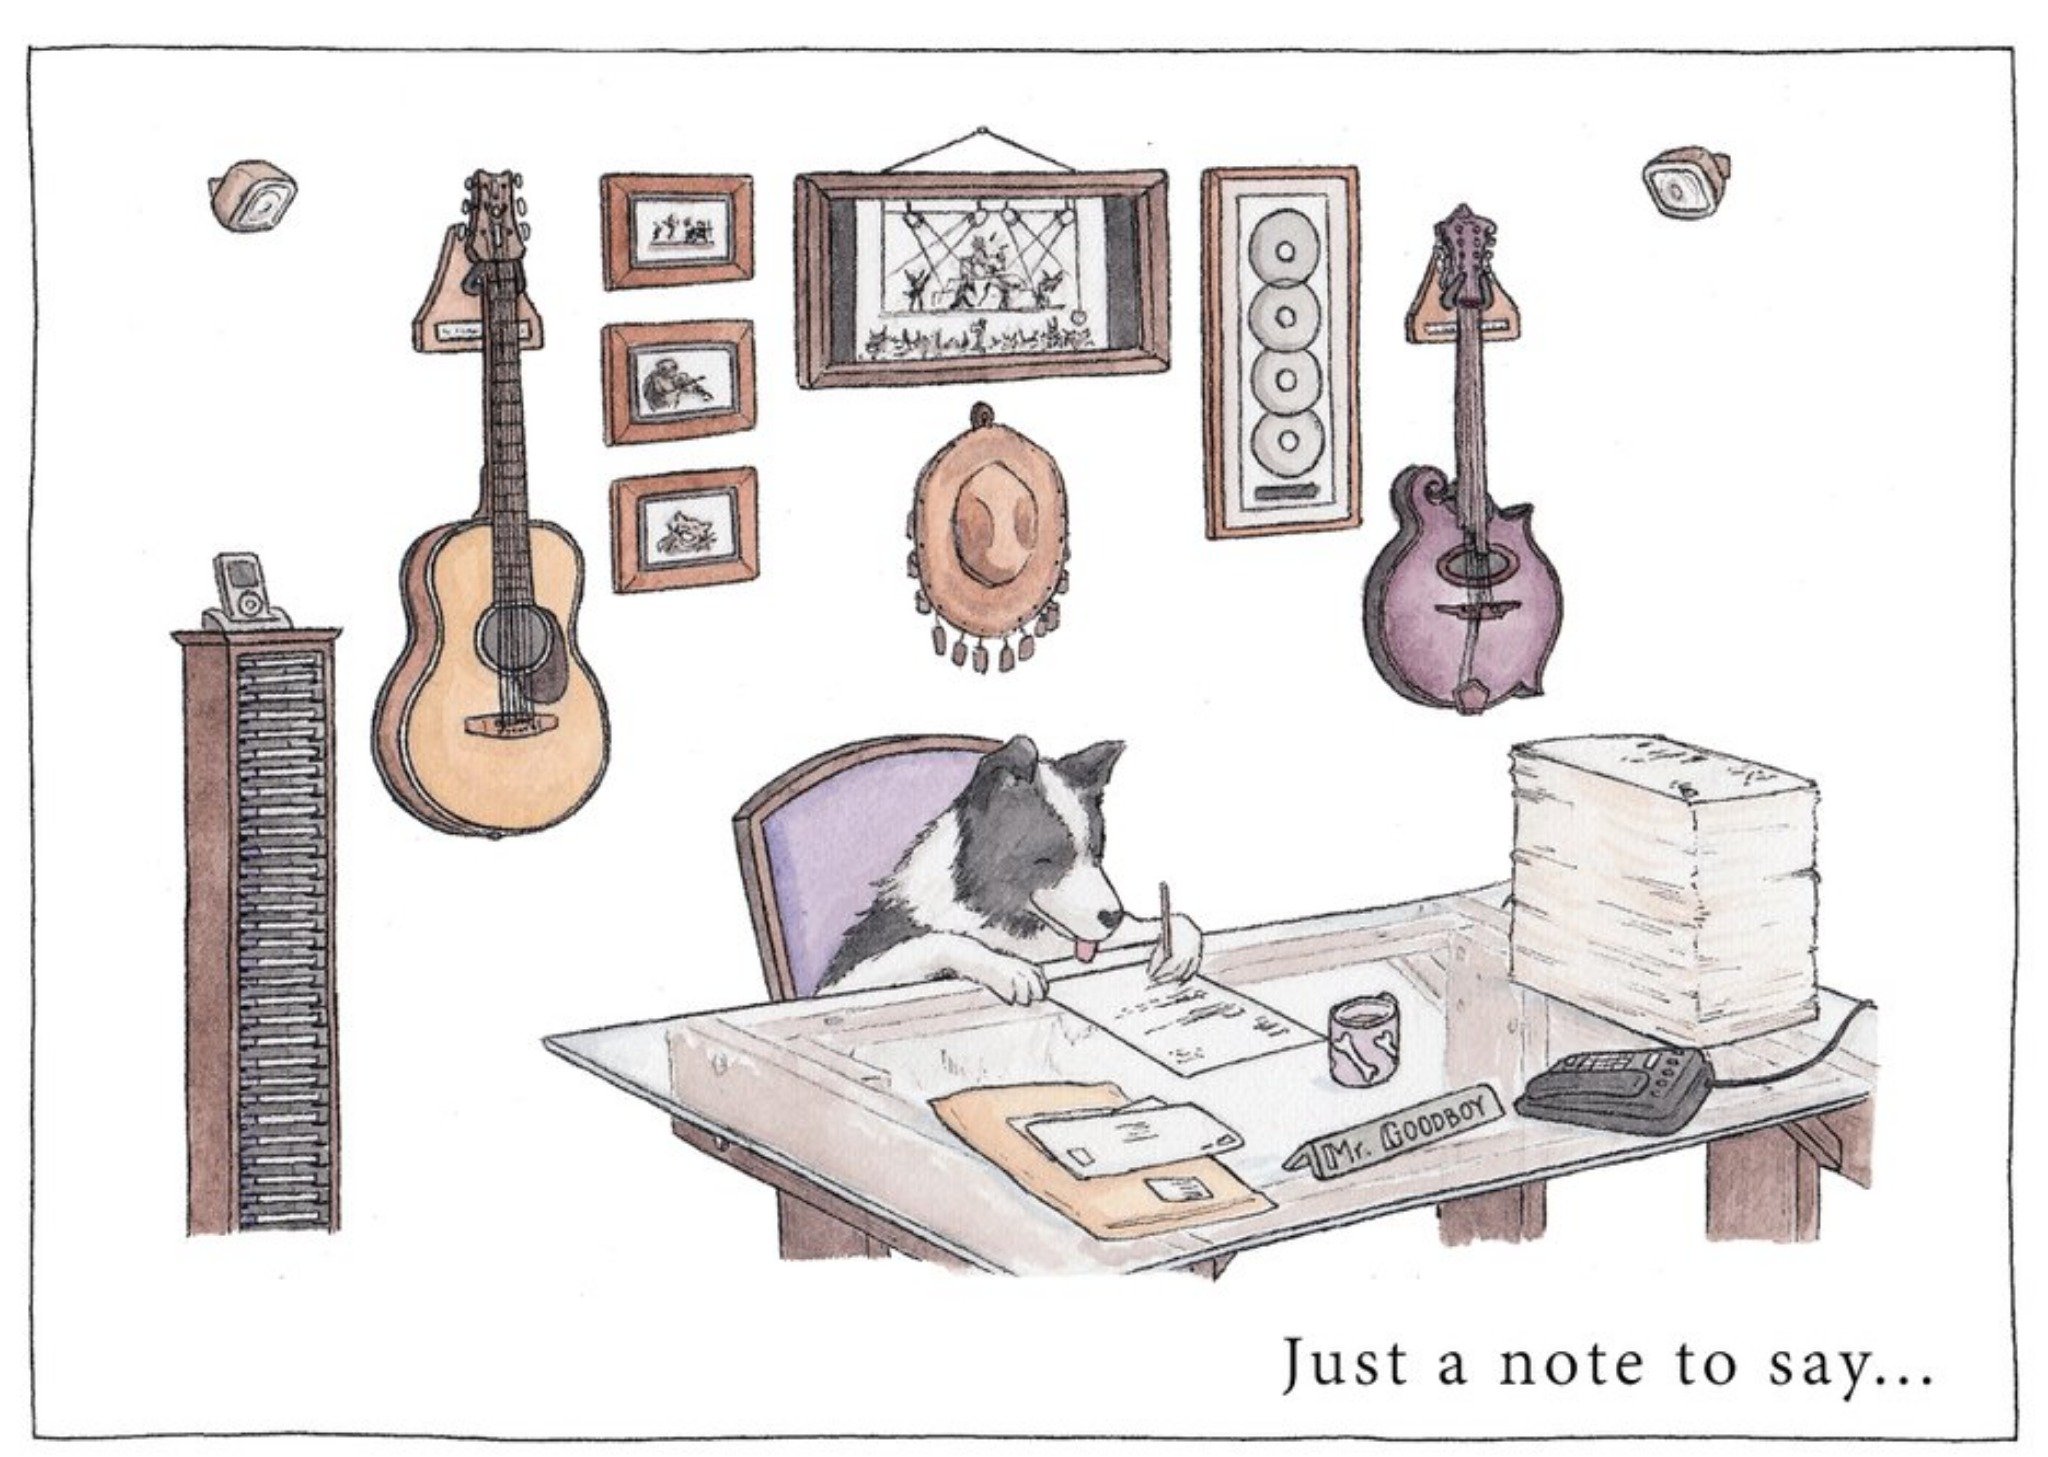 Moonpig Illustration Of A Dog Writting A Letter Just A Note To Say Card, Large